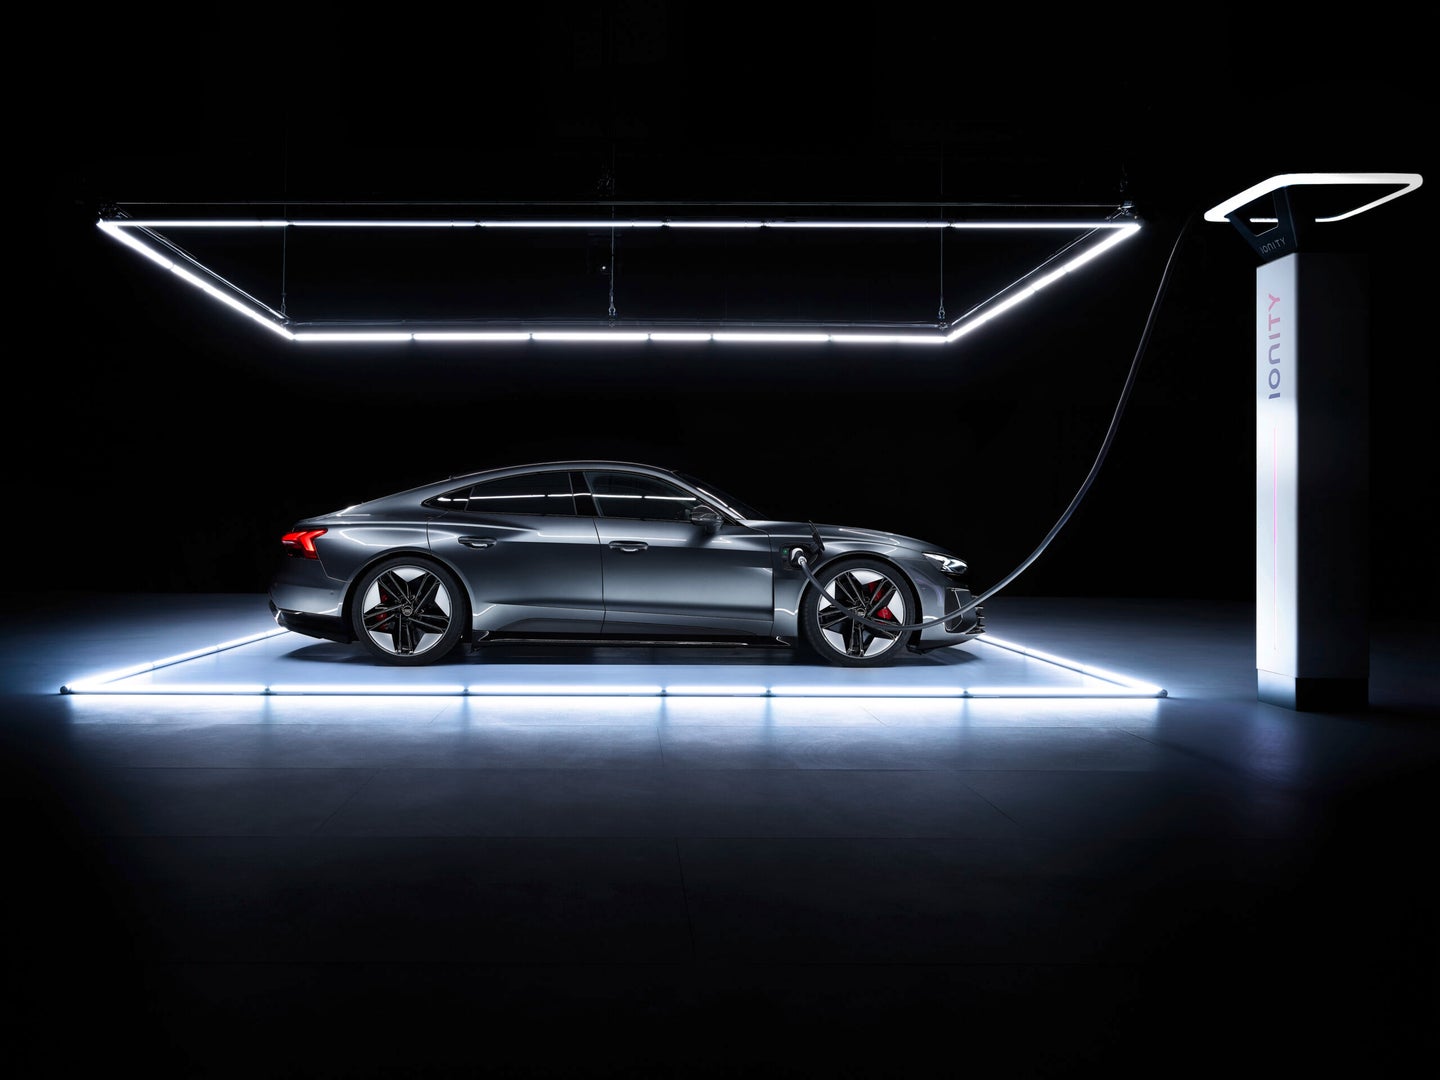 Audi e-tron electric car on the charger